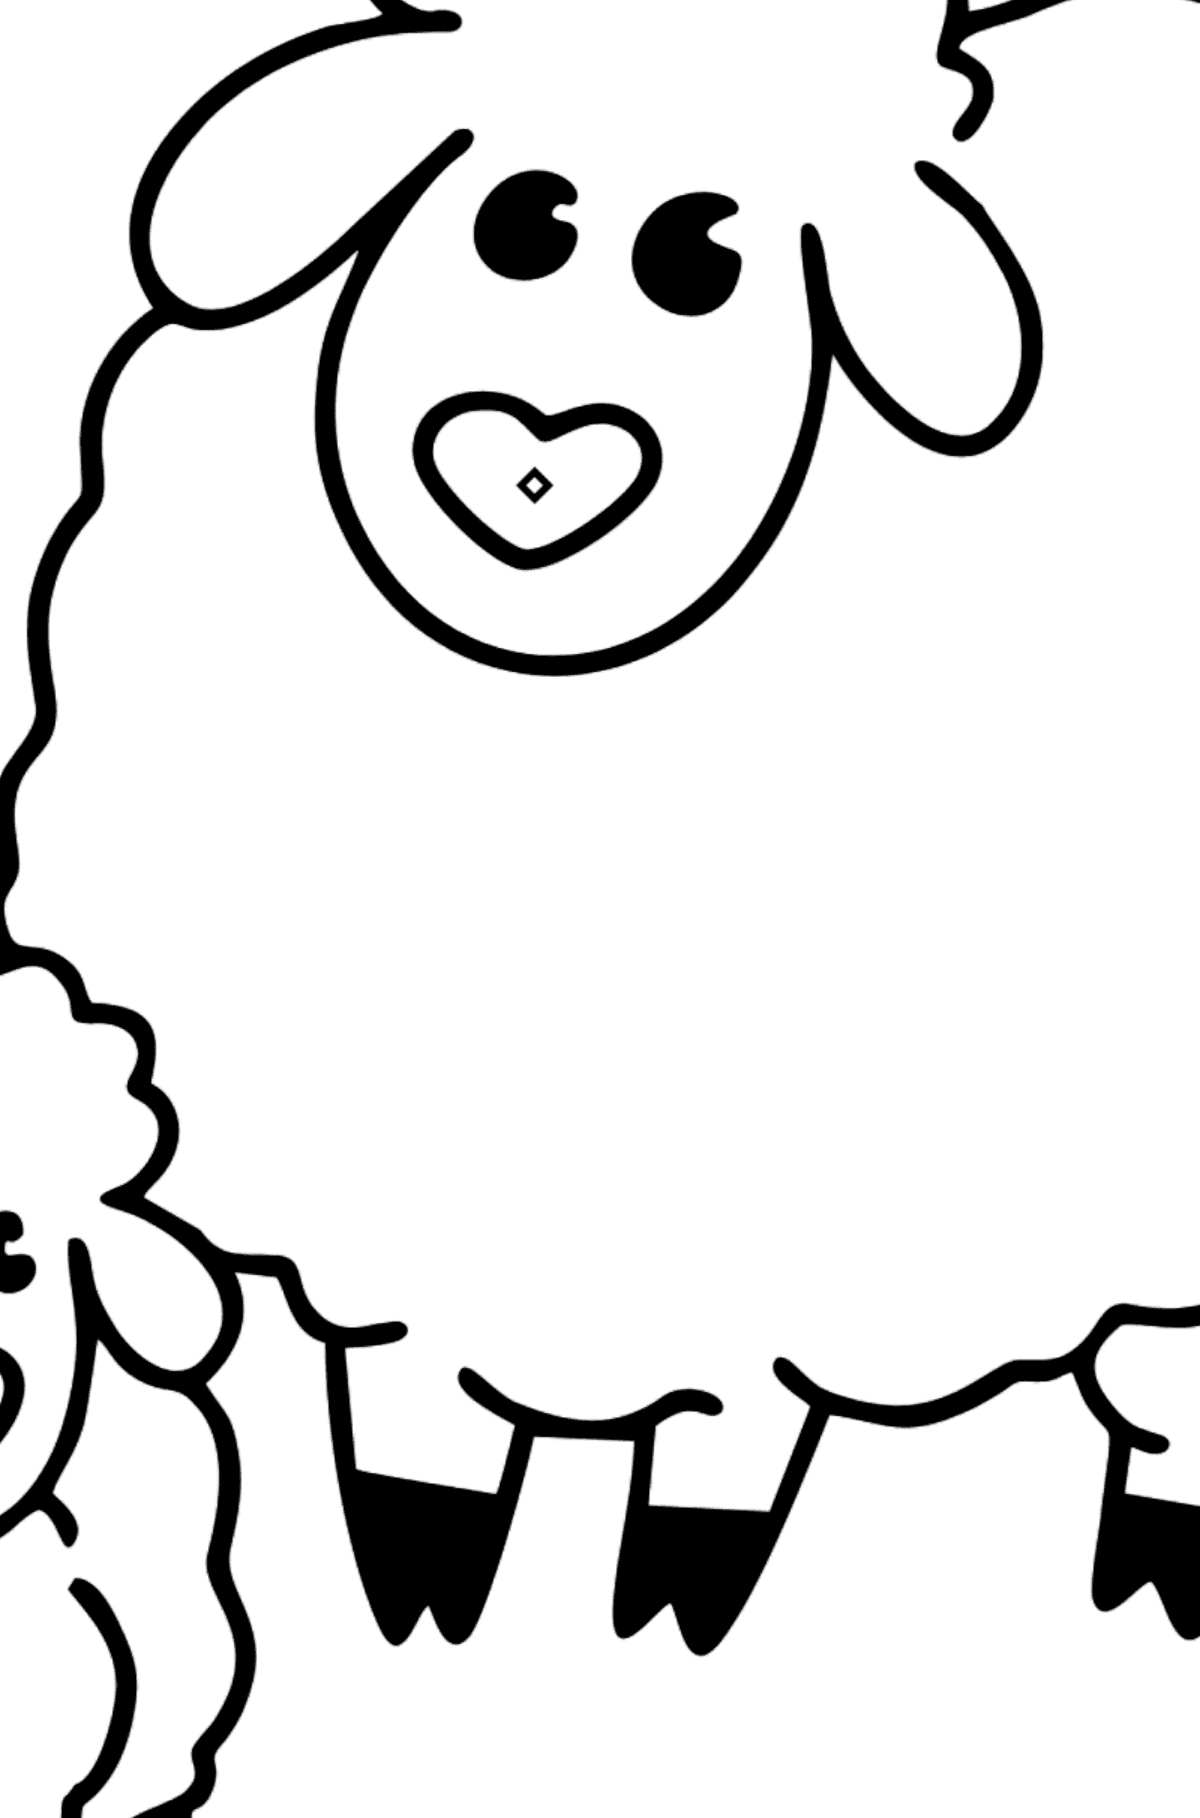 Sheep with Lamb coloring page - Coloring by Symbols and Geometric Shapes for Kids